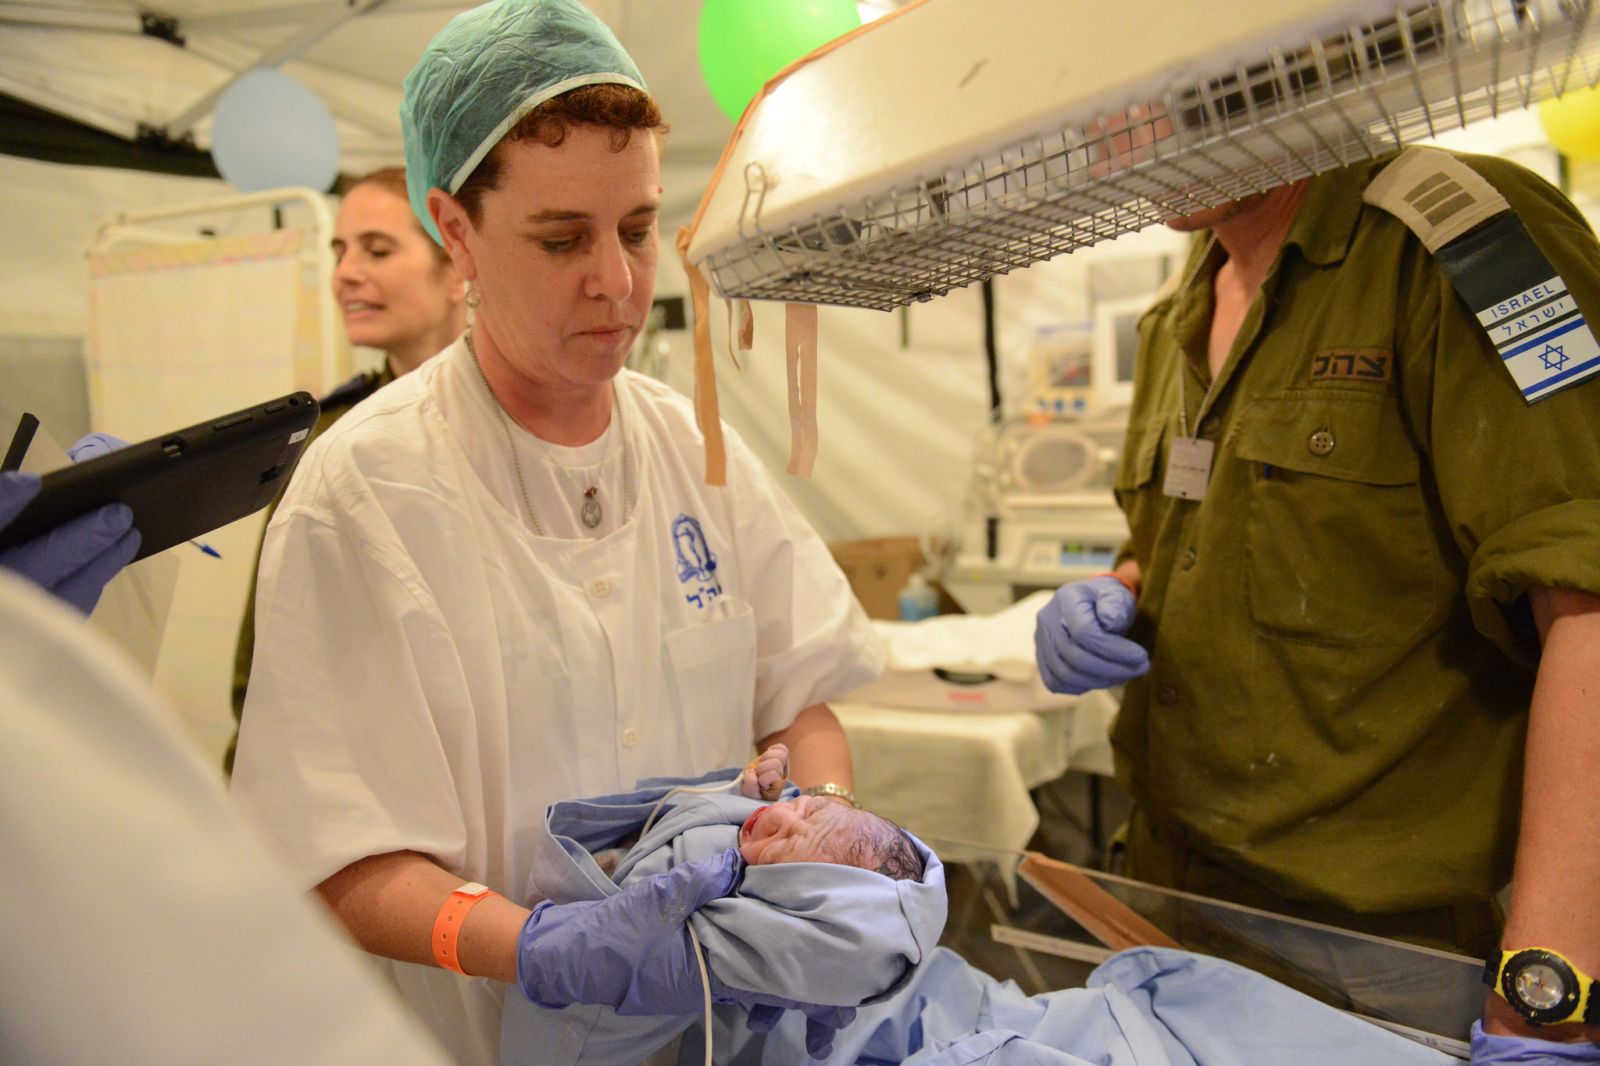 A baby is born at the IDF field hospital in Nepal. Photo: IDF